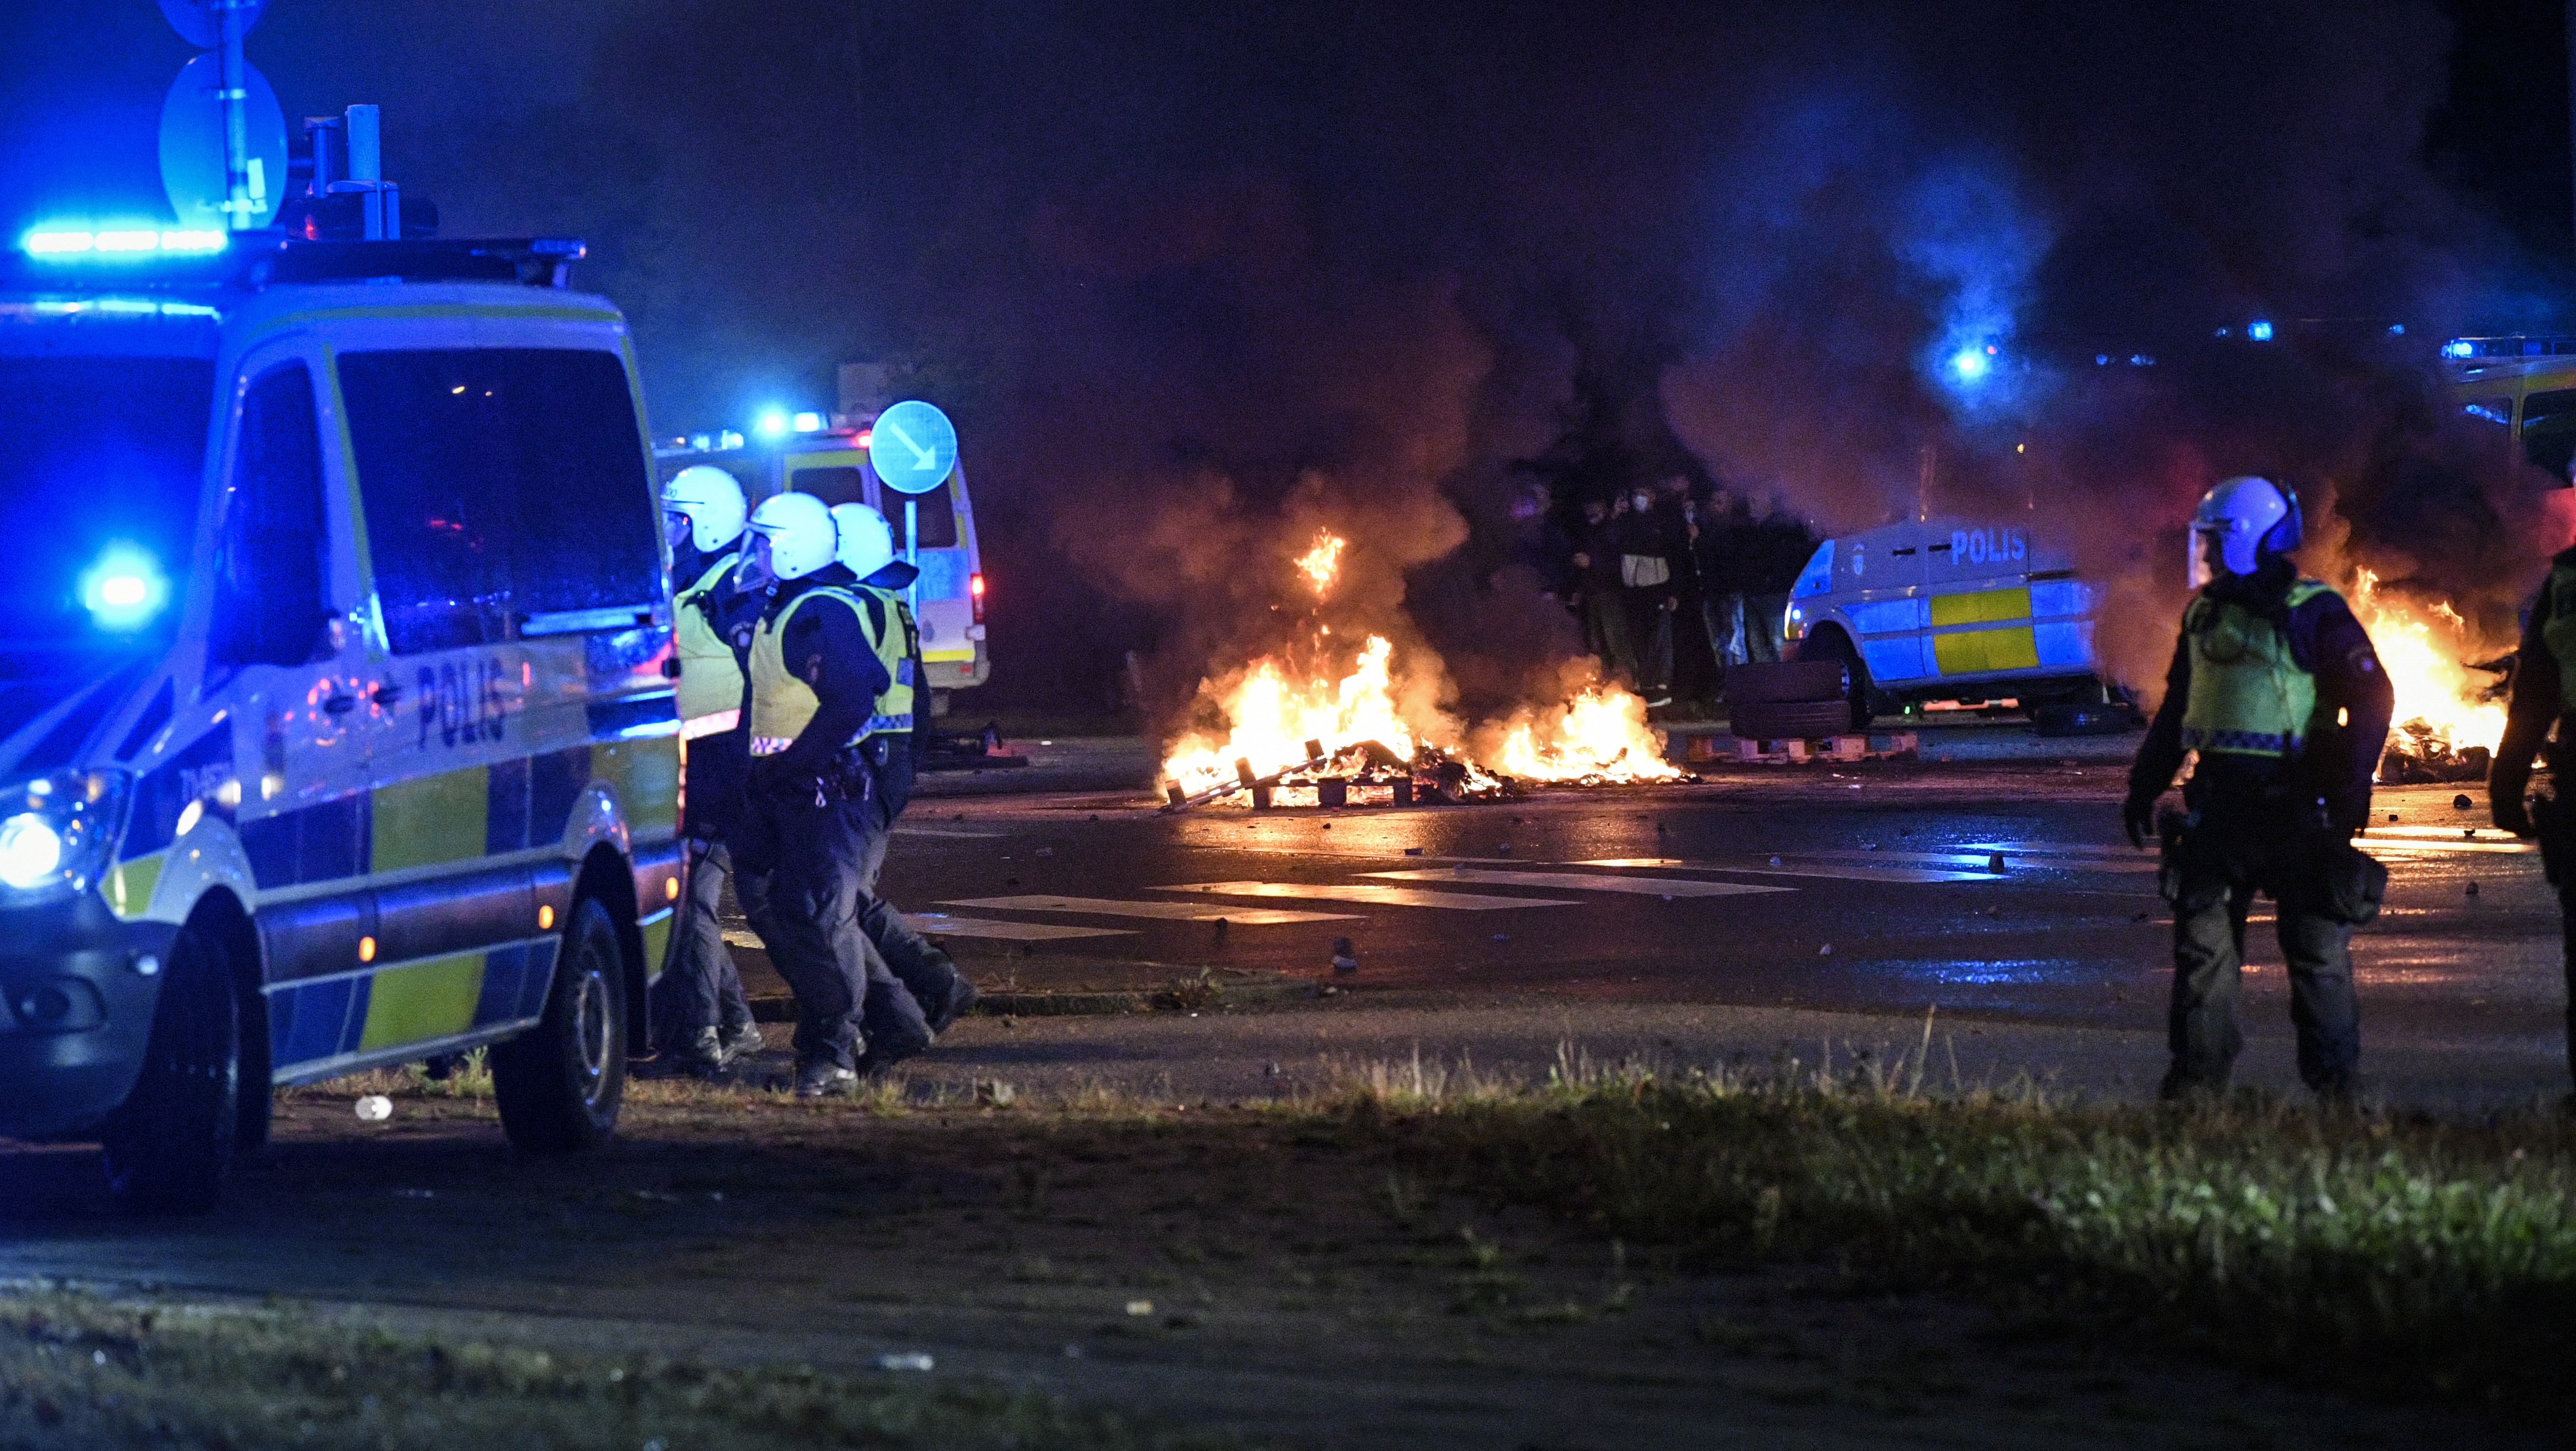 Riot police on the scene as smoke billows from burning tires and fireworks, as a few hundred protesters riot in the Rosengard neighbourhood of Malmo, Sweden, Friday, Aug. 28, 2020. Far-right activists burned a Quran in the southern Swedish city of Malmo, sparking riots and unrest after more than 300 people gathered to protest, police said Saturday. Rioters set fires and threw objects at police and rescue services Friday night, slightly injuring several police officers and leading to the detention of about 15 people. (TT News Agency via AP)